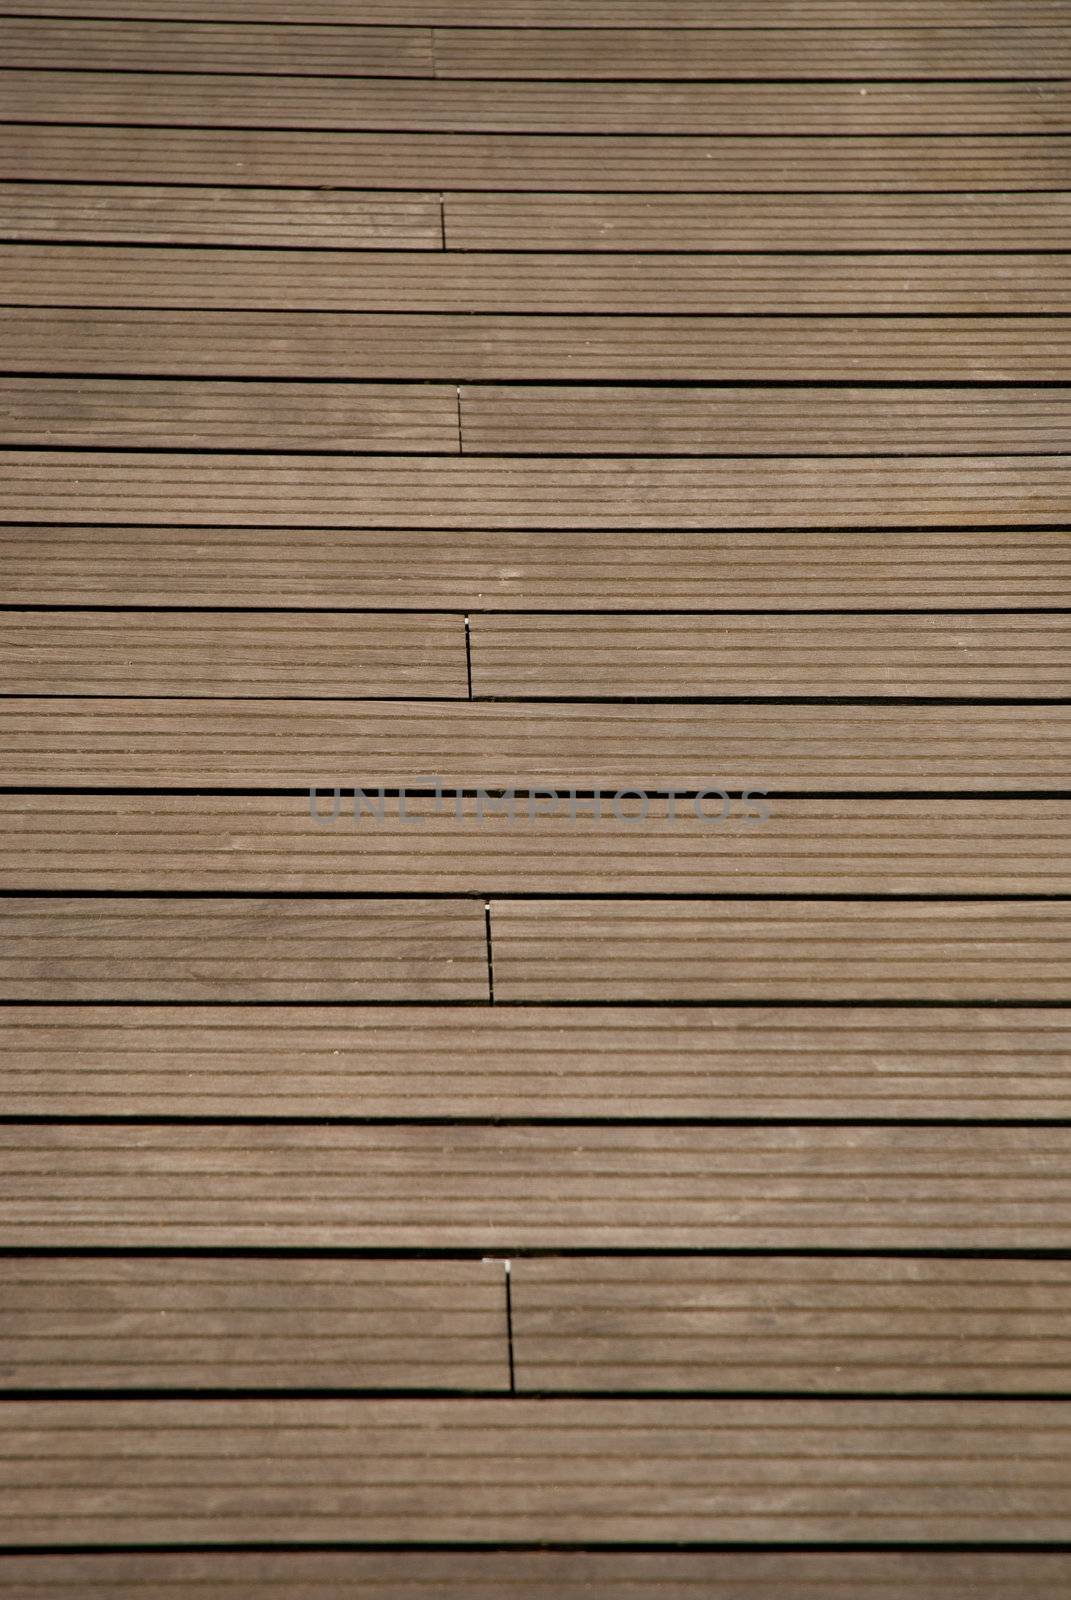 Part of a brown woodboard texture.